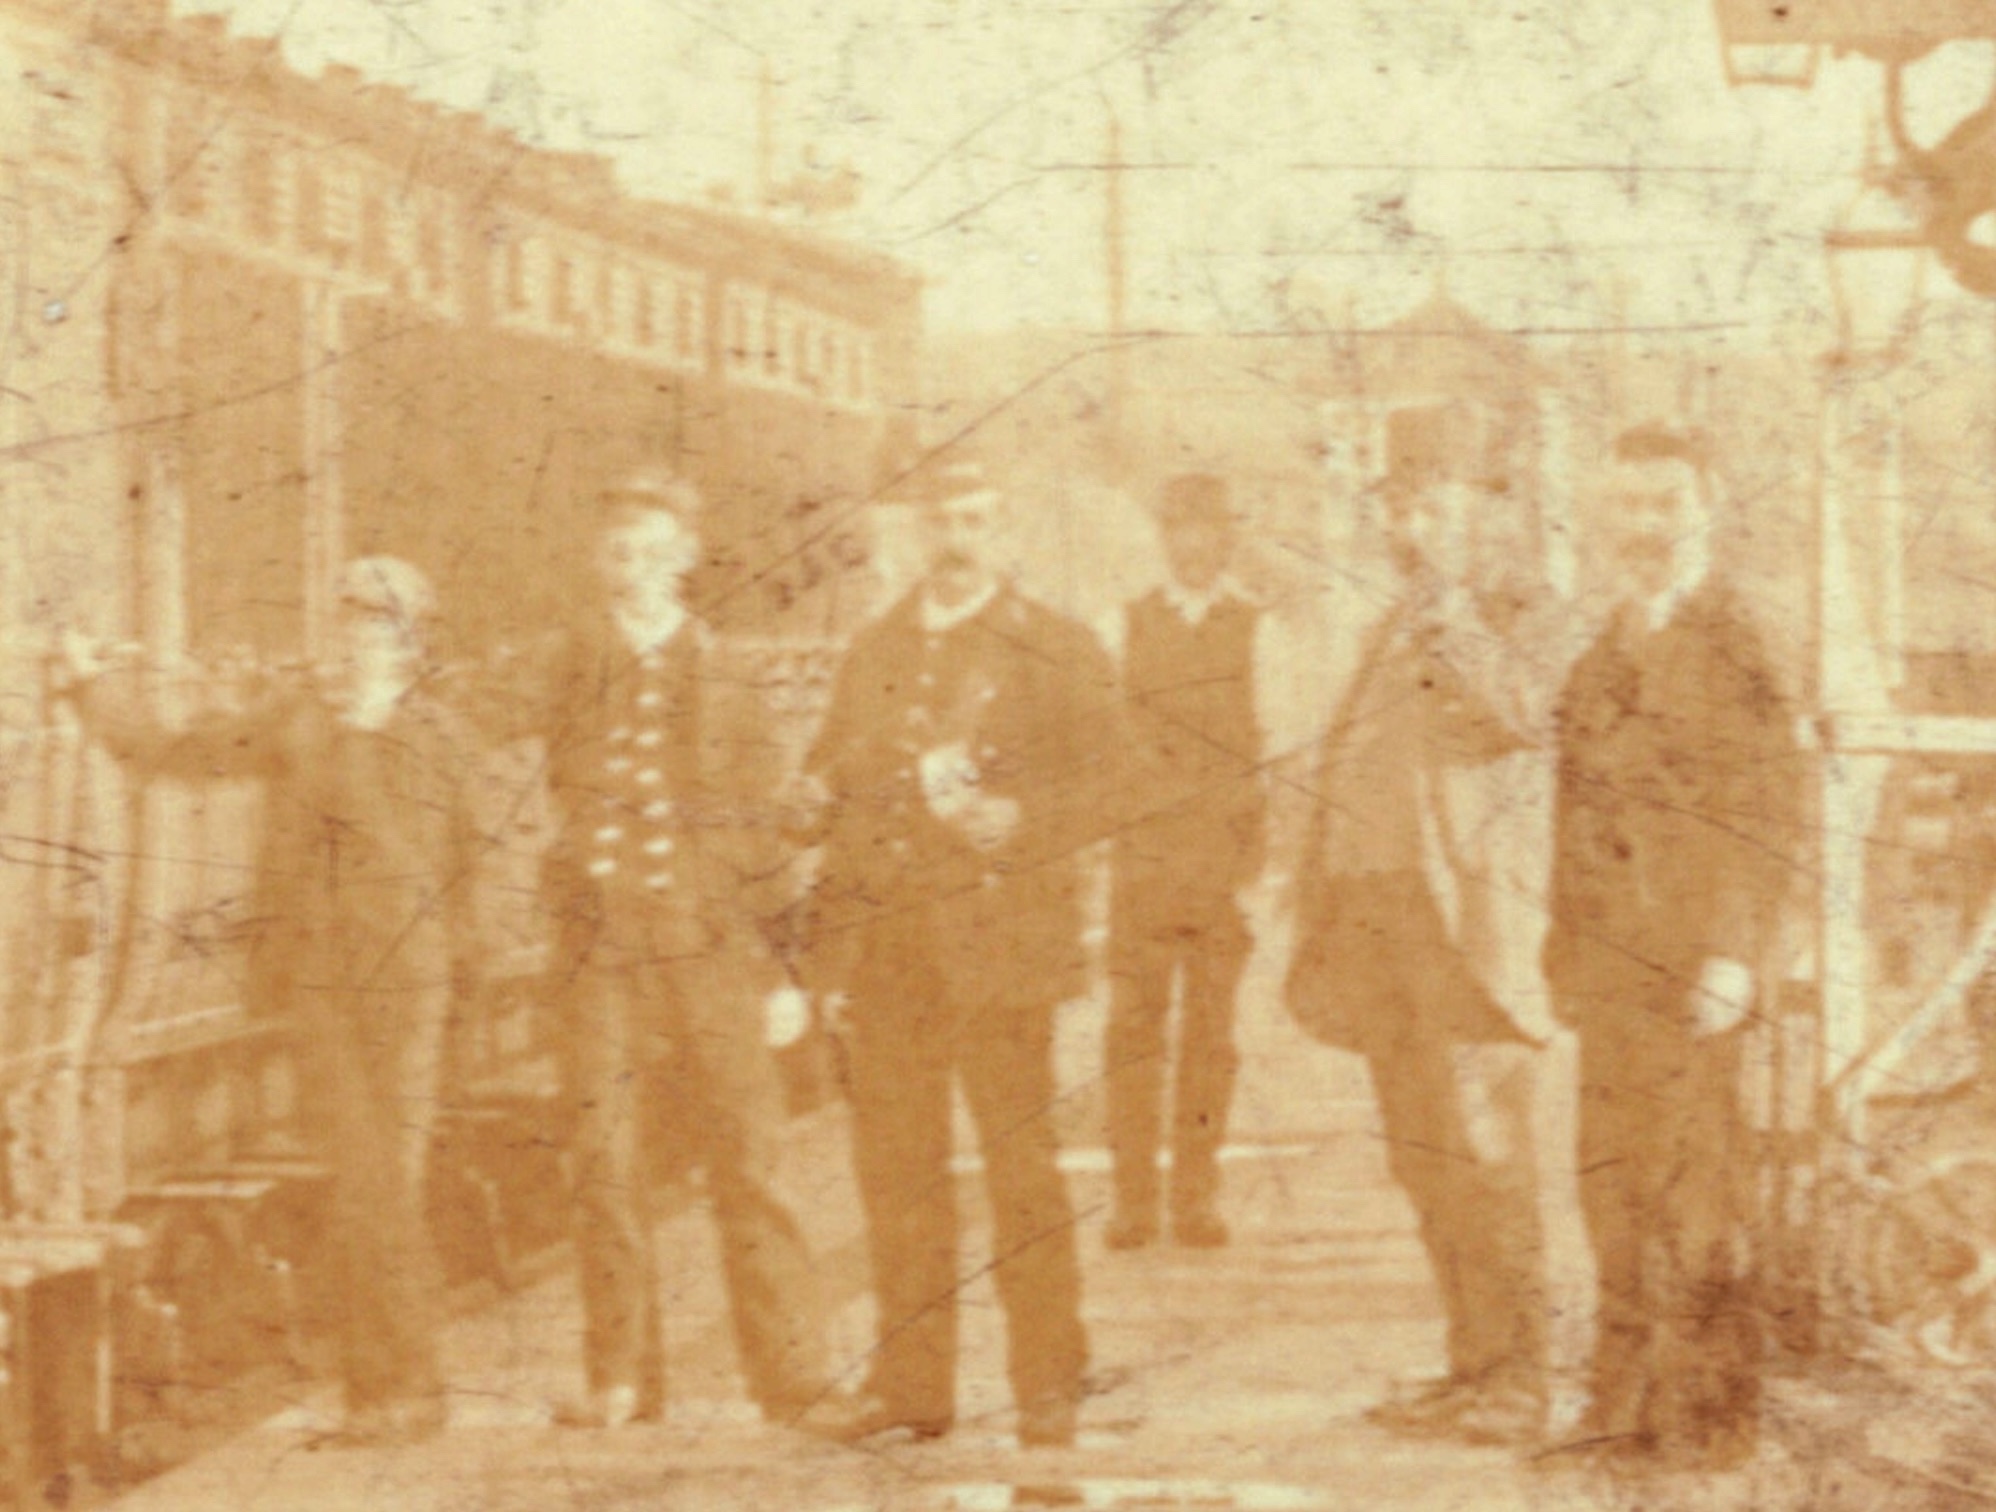 A close up of the above imageconcentrating ona group of men in the middle distance standing by the train. A signal box is visible in the background